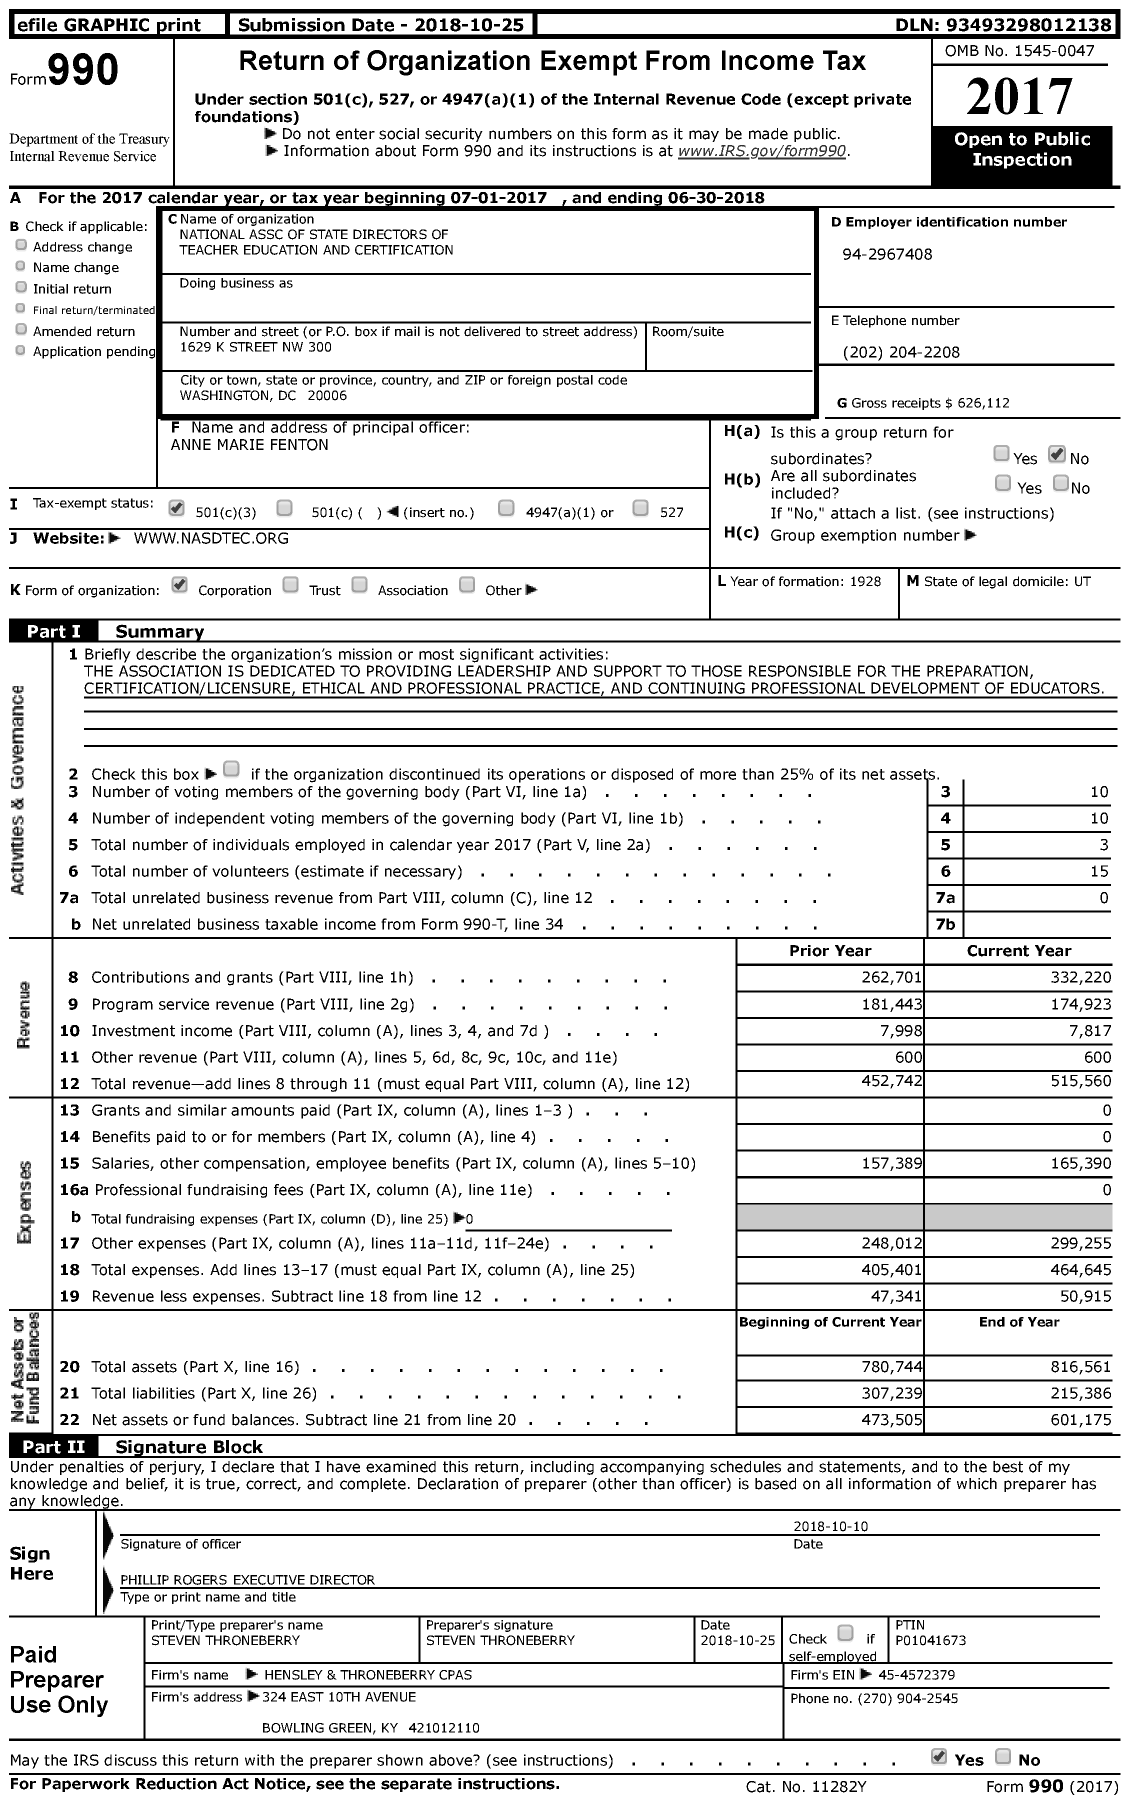 Image of first page of 2017 Form 990 for National Assc of State Directors of Teacher Education and Certification